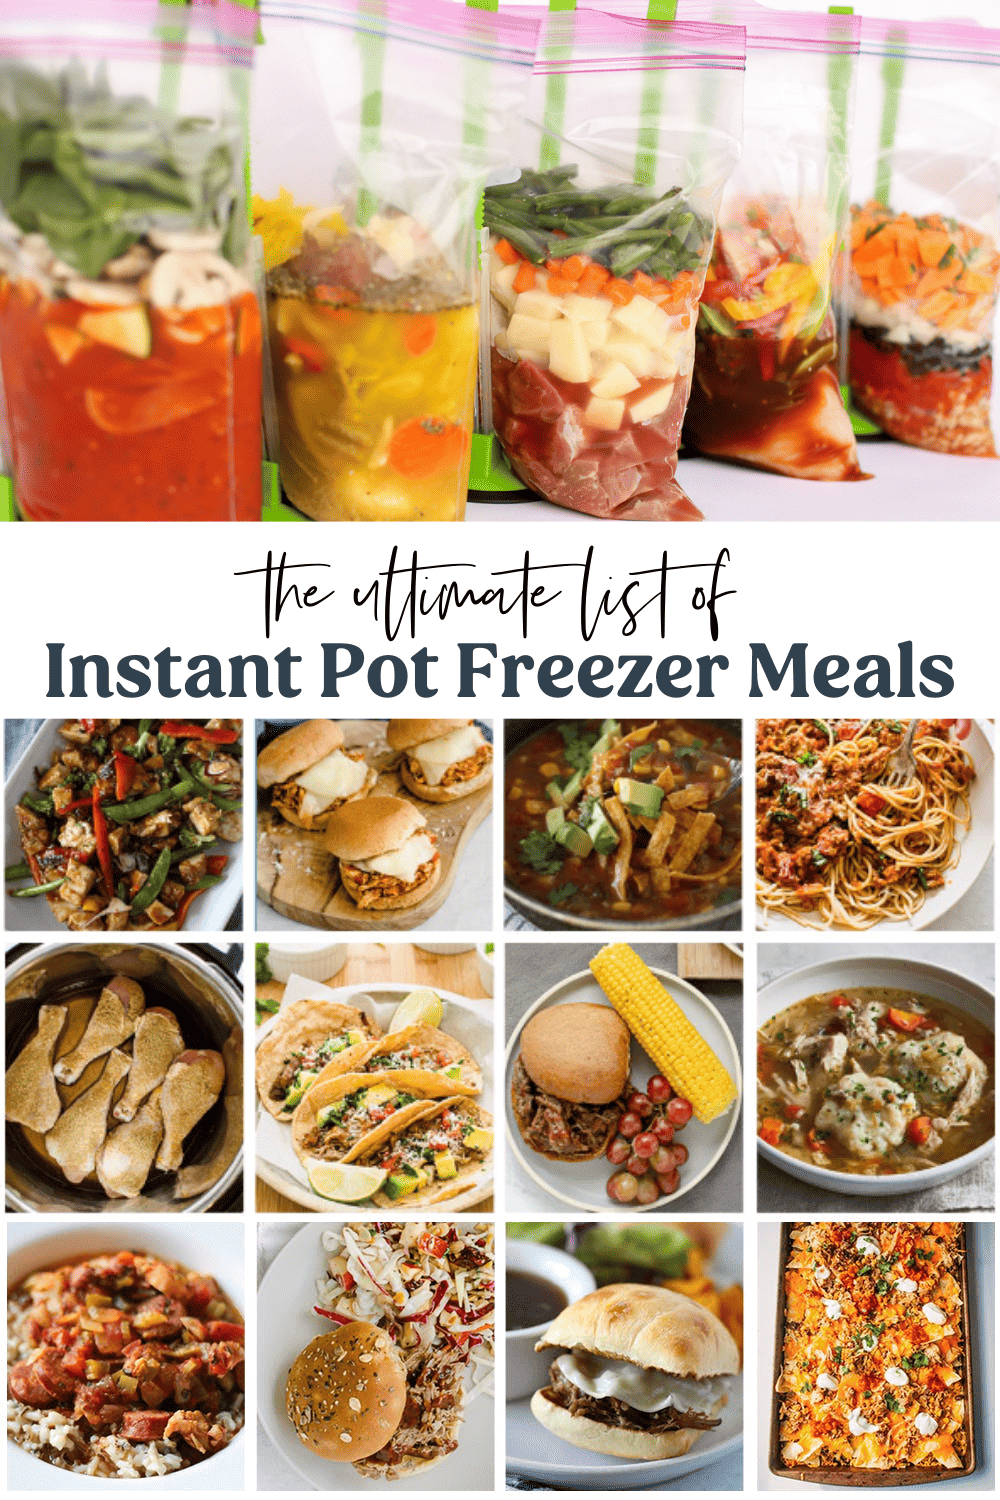 freezer meals in freezer bags and photographs of finished Instant Pot meals that are plated.